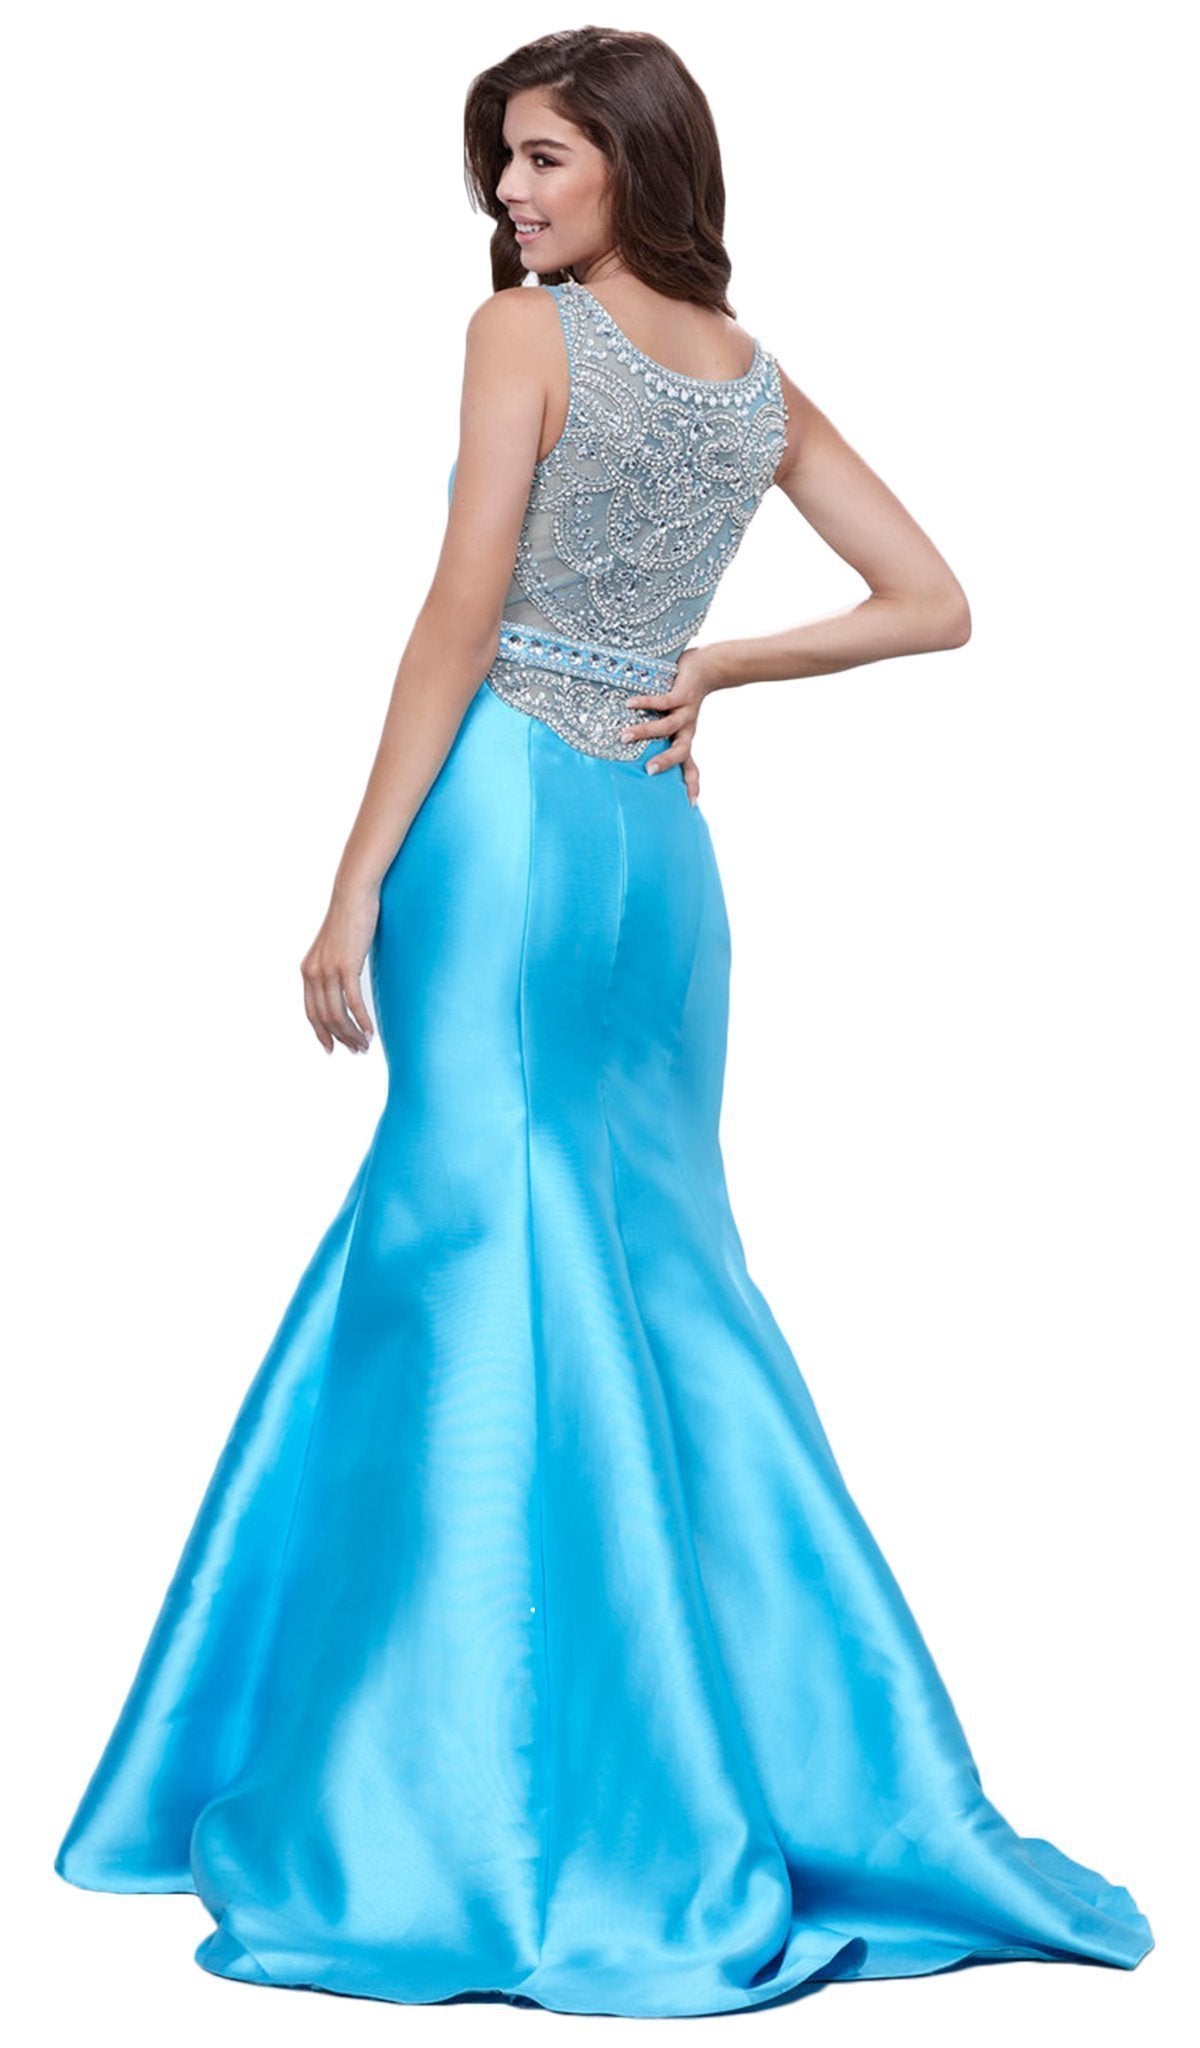 Nox Anabel - 8299 Sleeveless Gemstone Embellished Trumpet Gown Special Occasion Dress XS / Turquoise